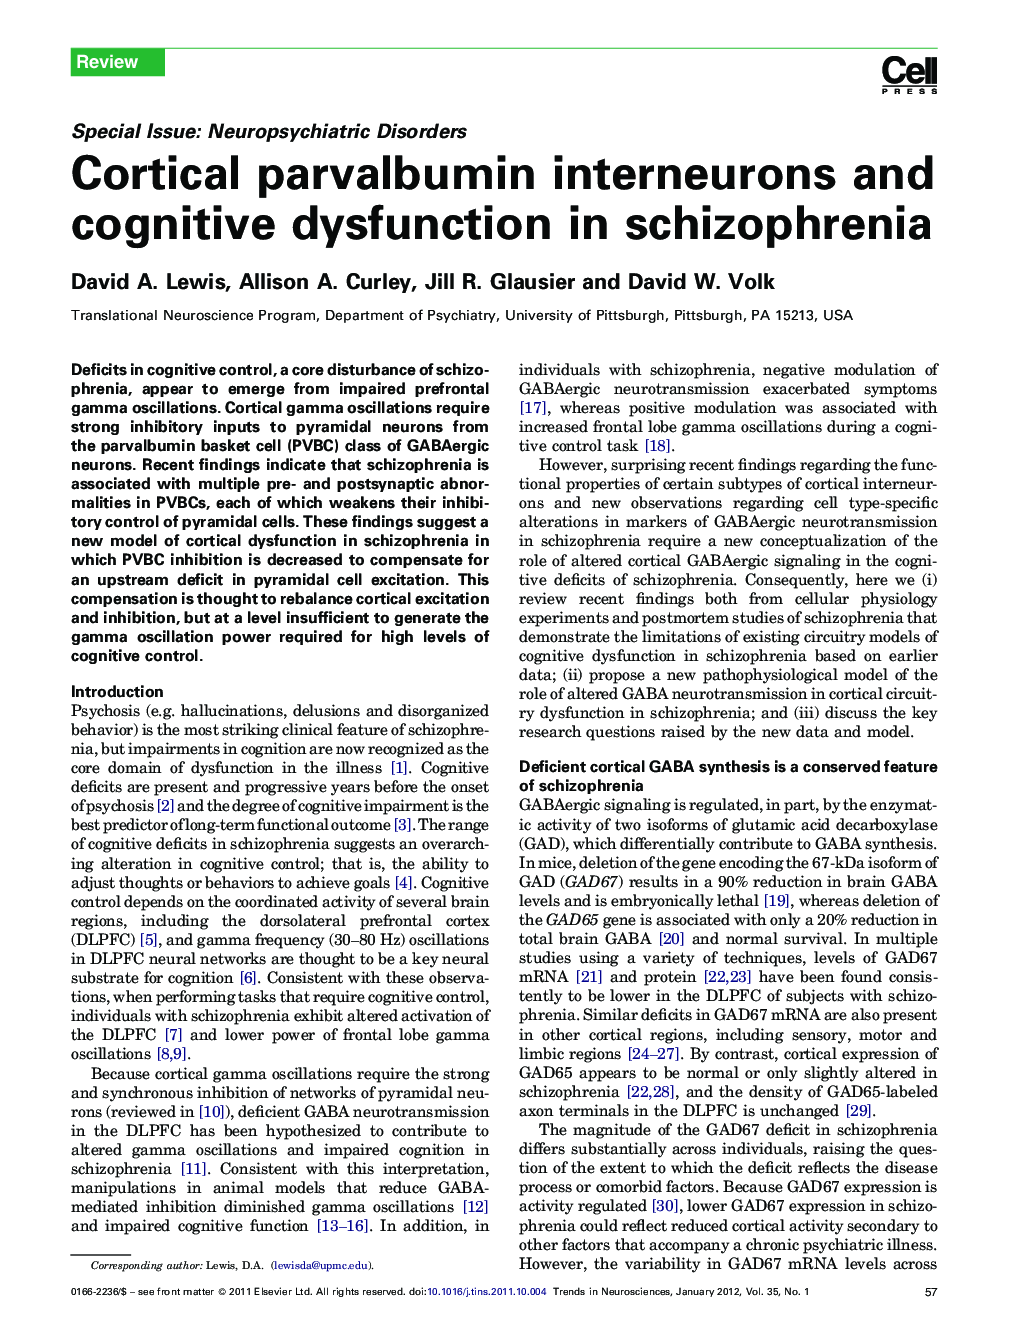 Cortical parvalbumin interneurons and cognitive dysfunction in schizophrenia